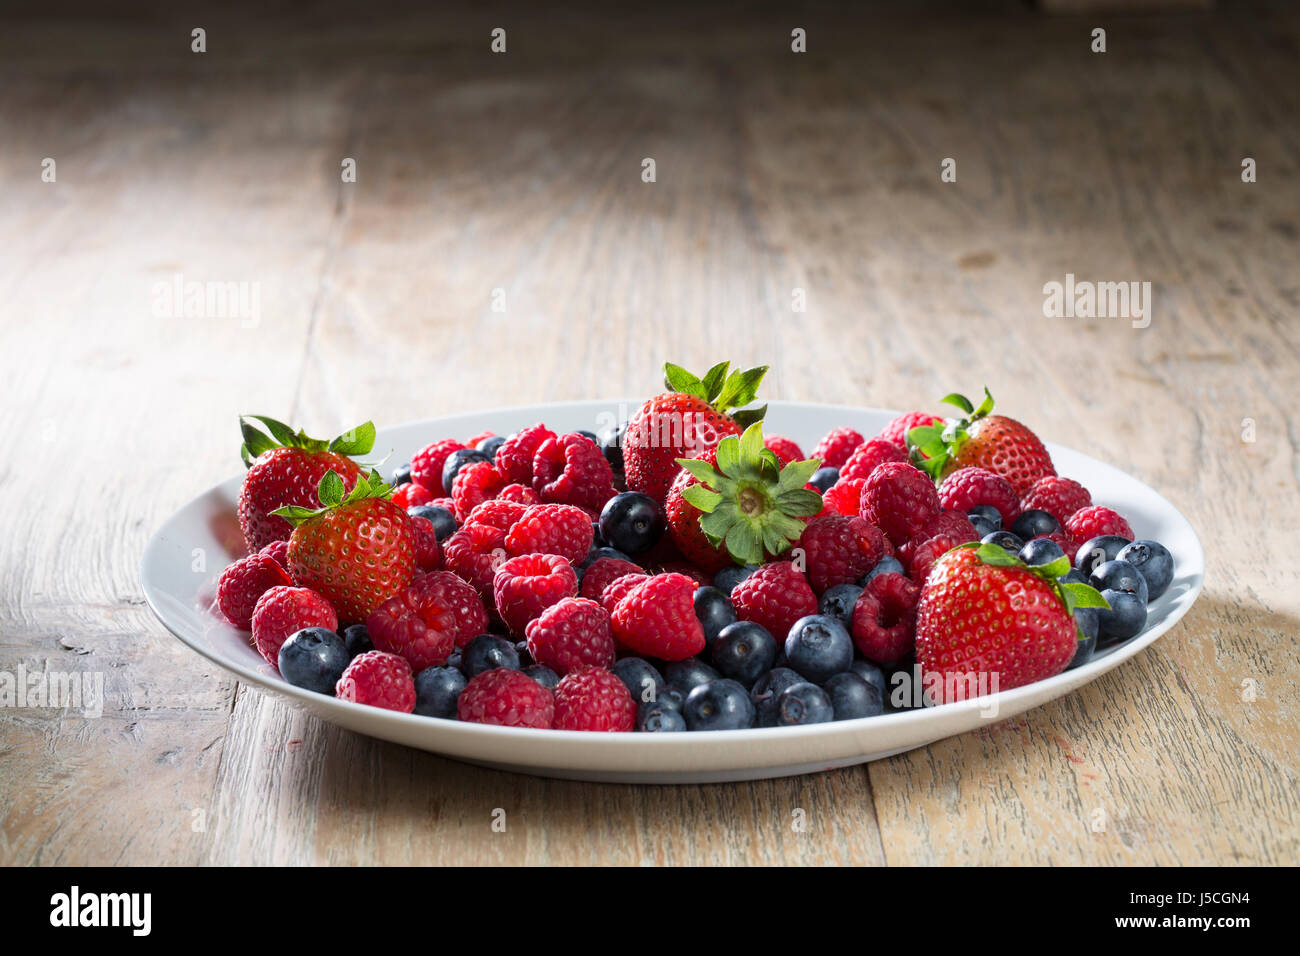 Plate of fresh berries sitting on a rustic wooden table. Stock Photo